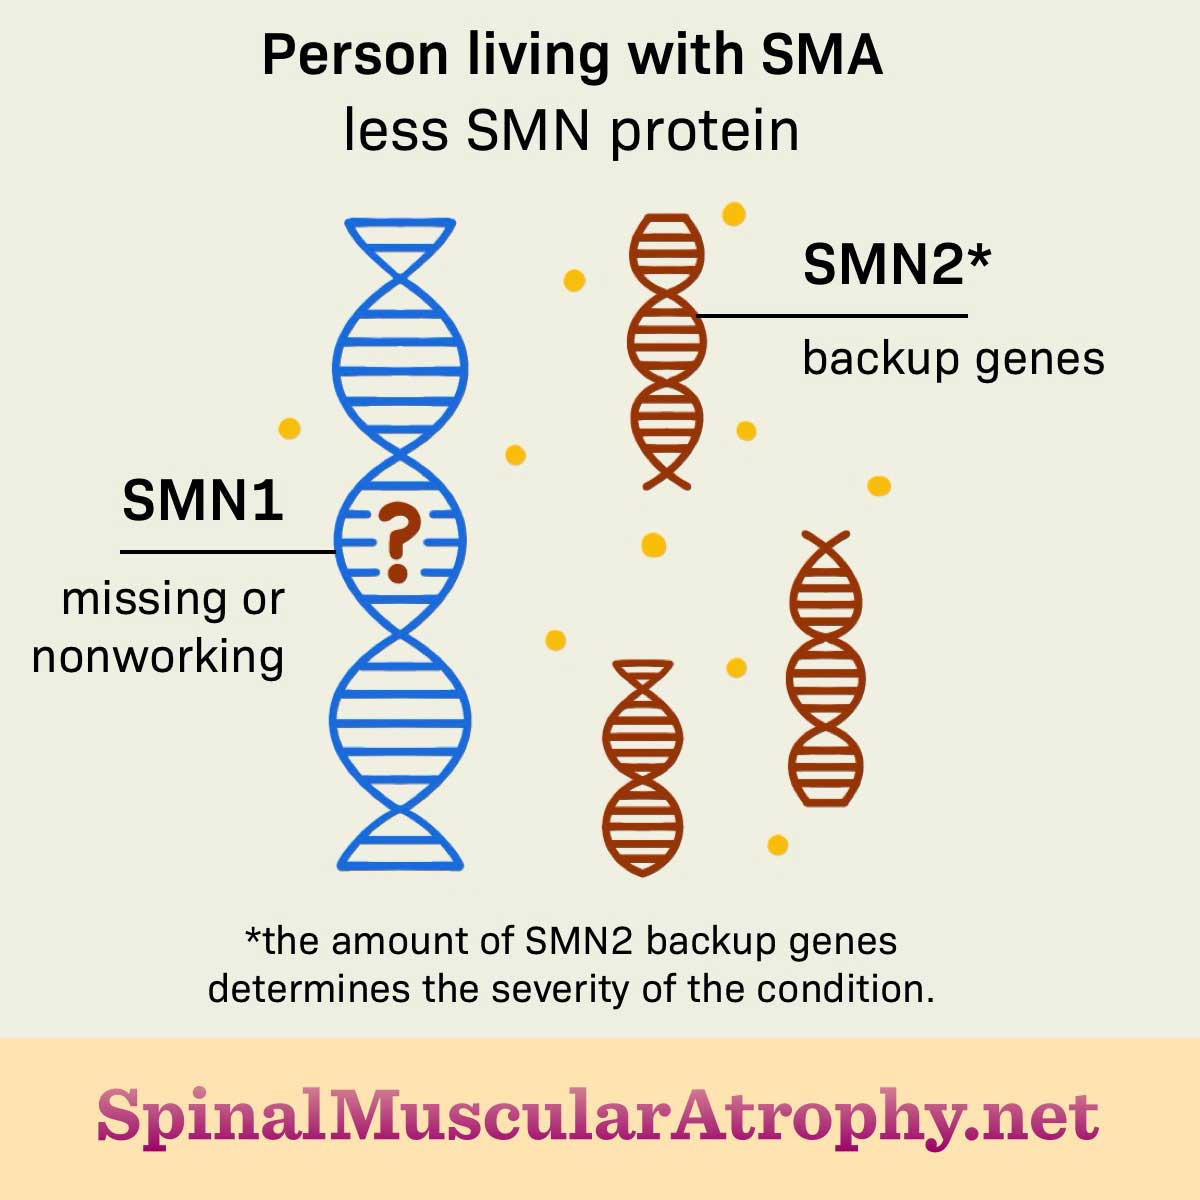 SMA is due to missing or non-working SMN1. The severity of SMA depends on the amount of SMN2 genes.